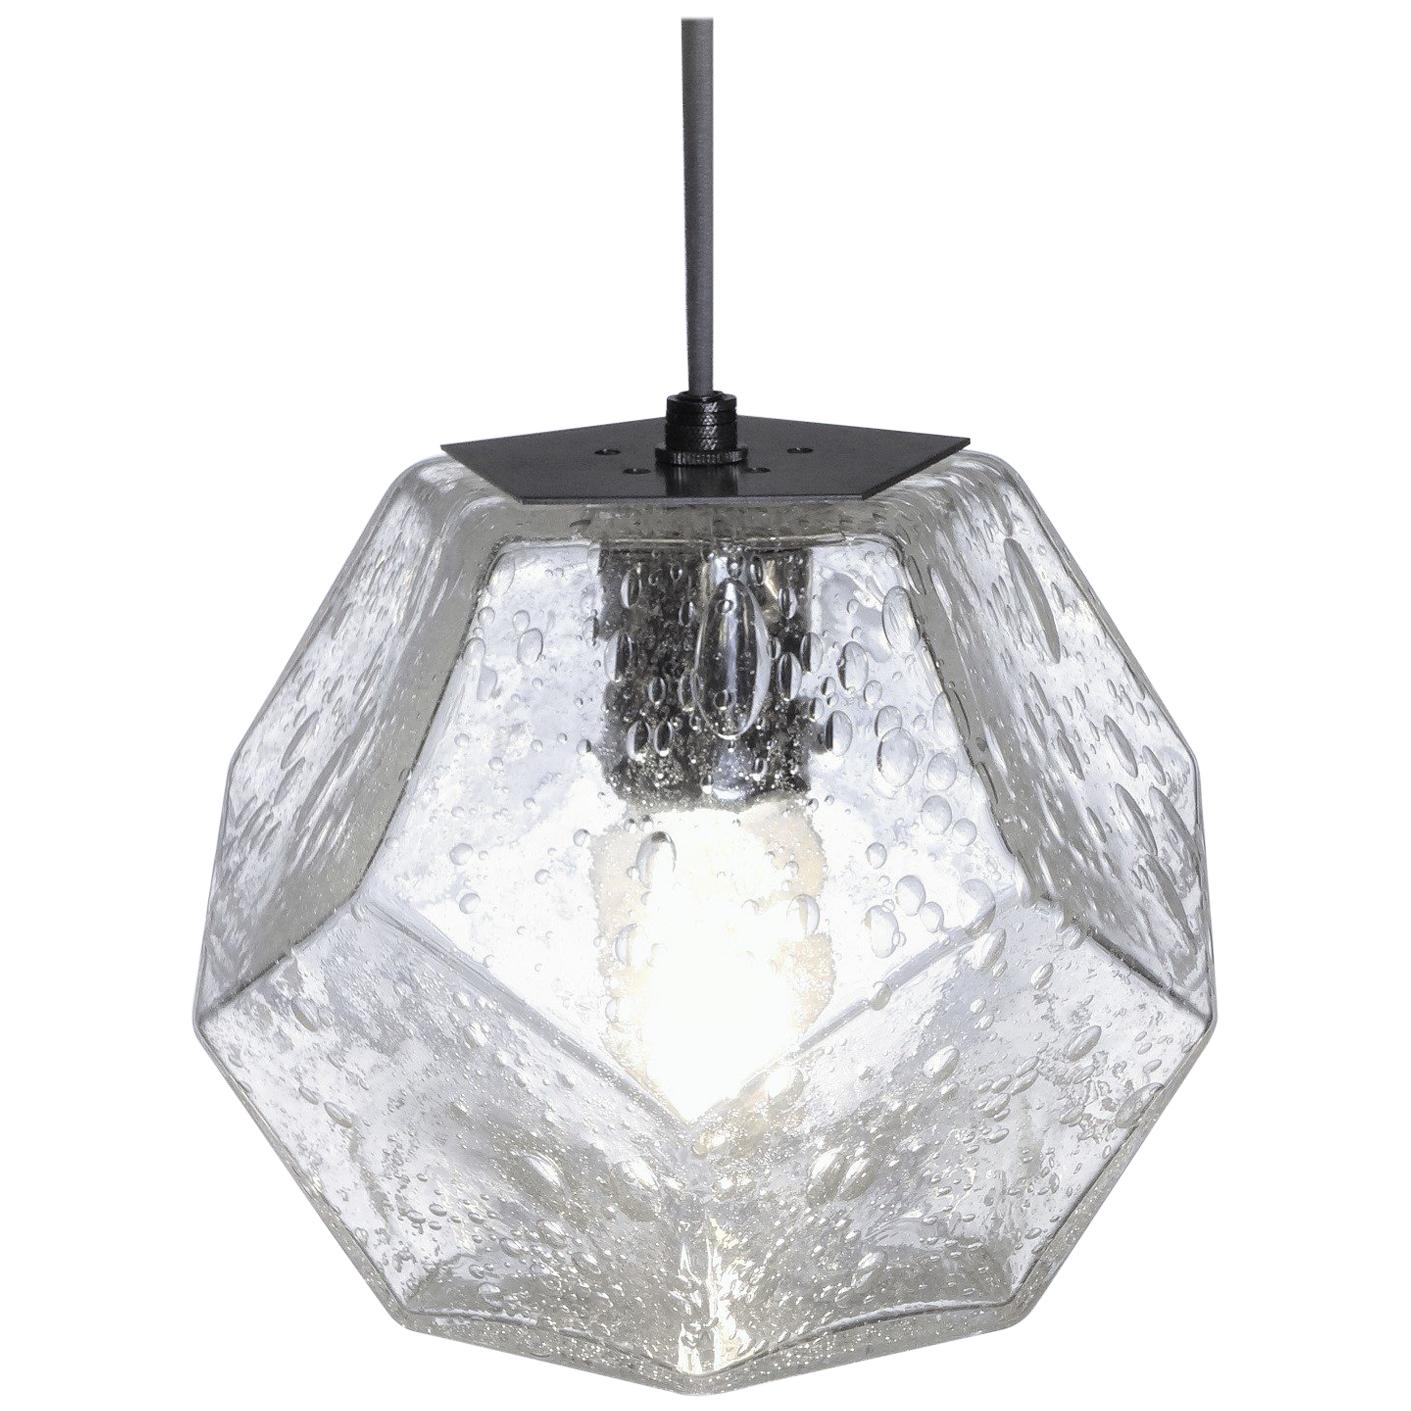 Modern Handmade Glass Lighting, Hedron Series Pendant in Bubbled Glass